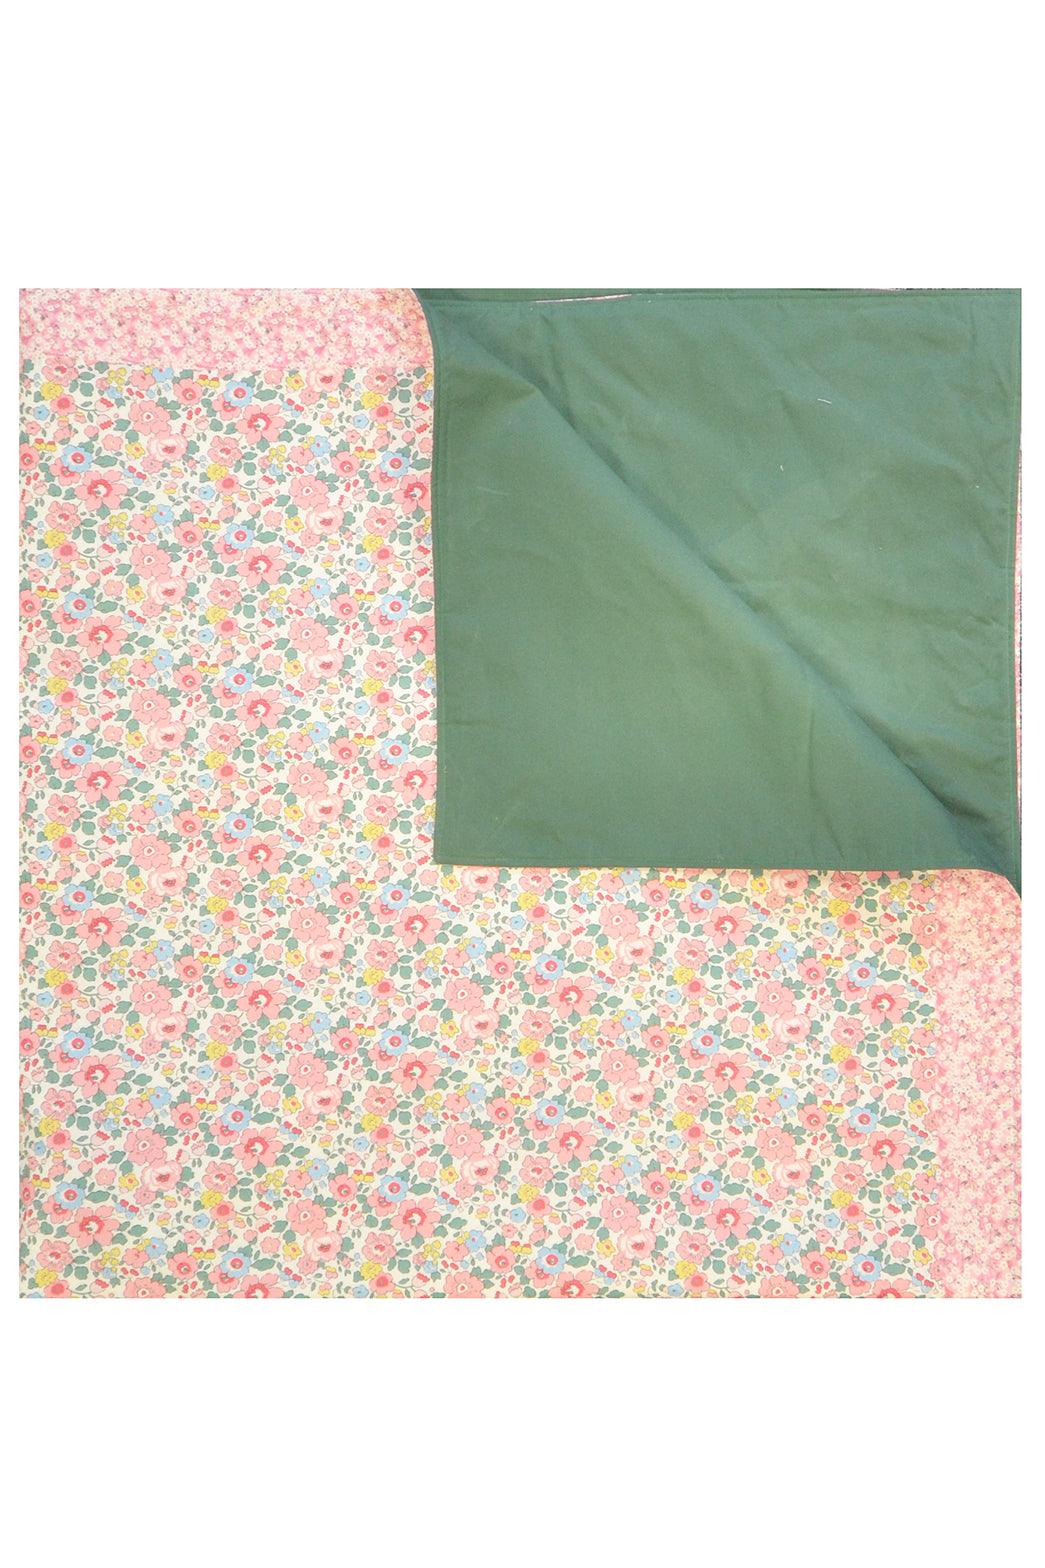 Picnic Blanket made with Liberty Fabric BETSY CANDY FLOSS & MITSI VALERIA PINK - Coco & Wolf